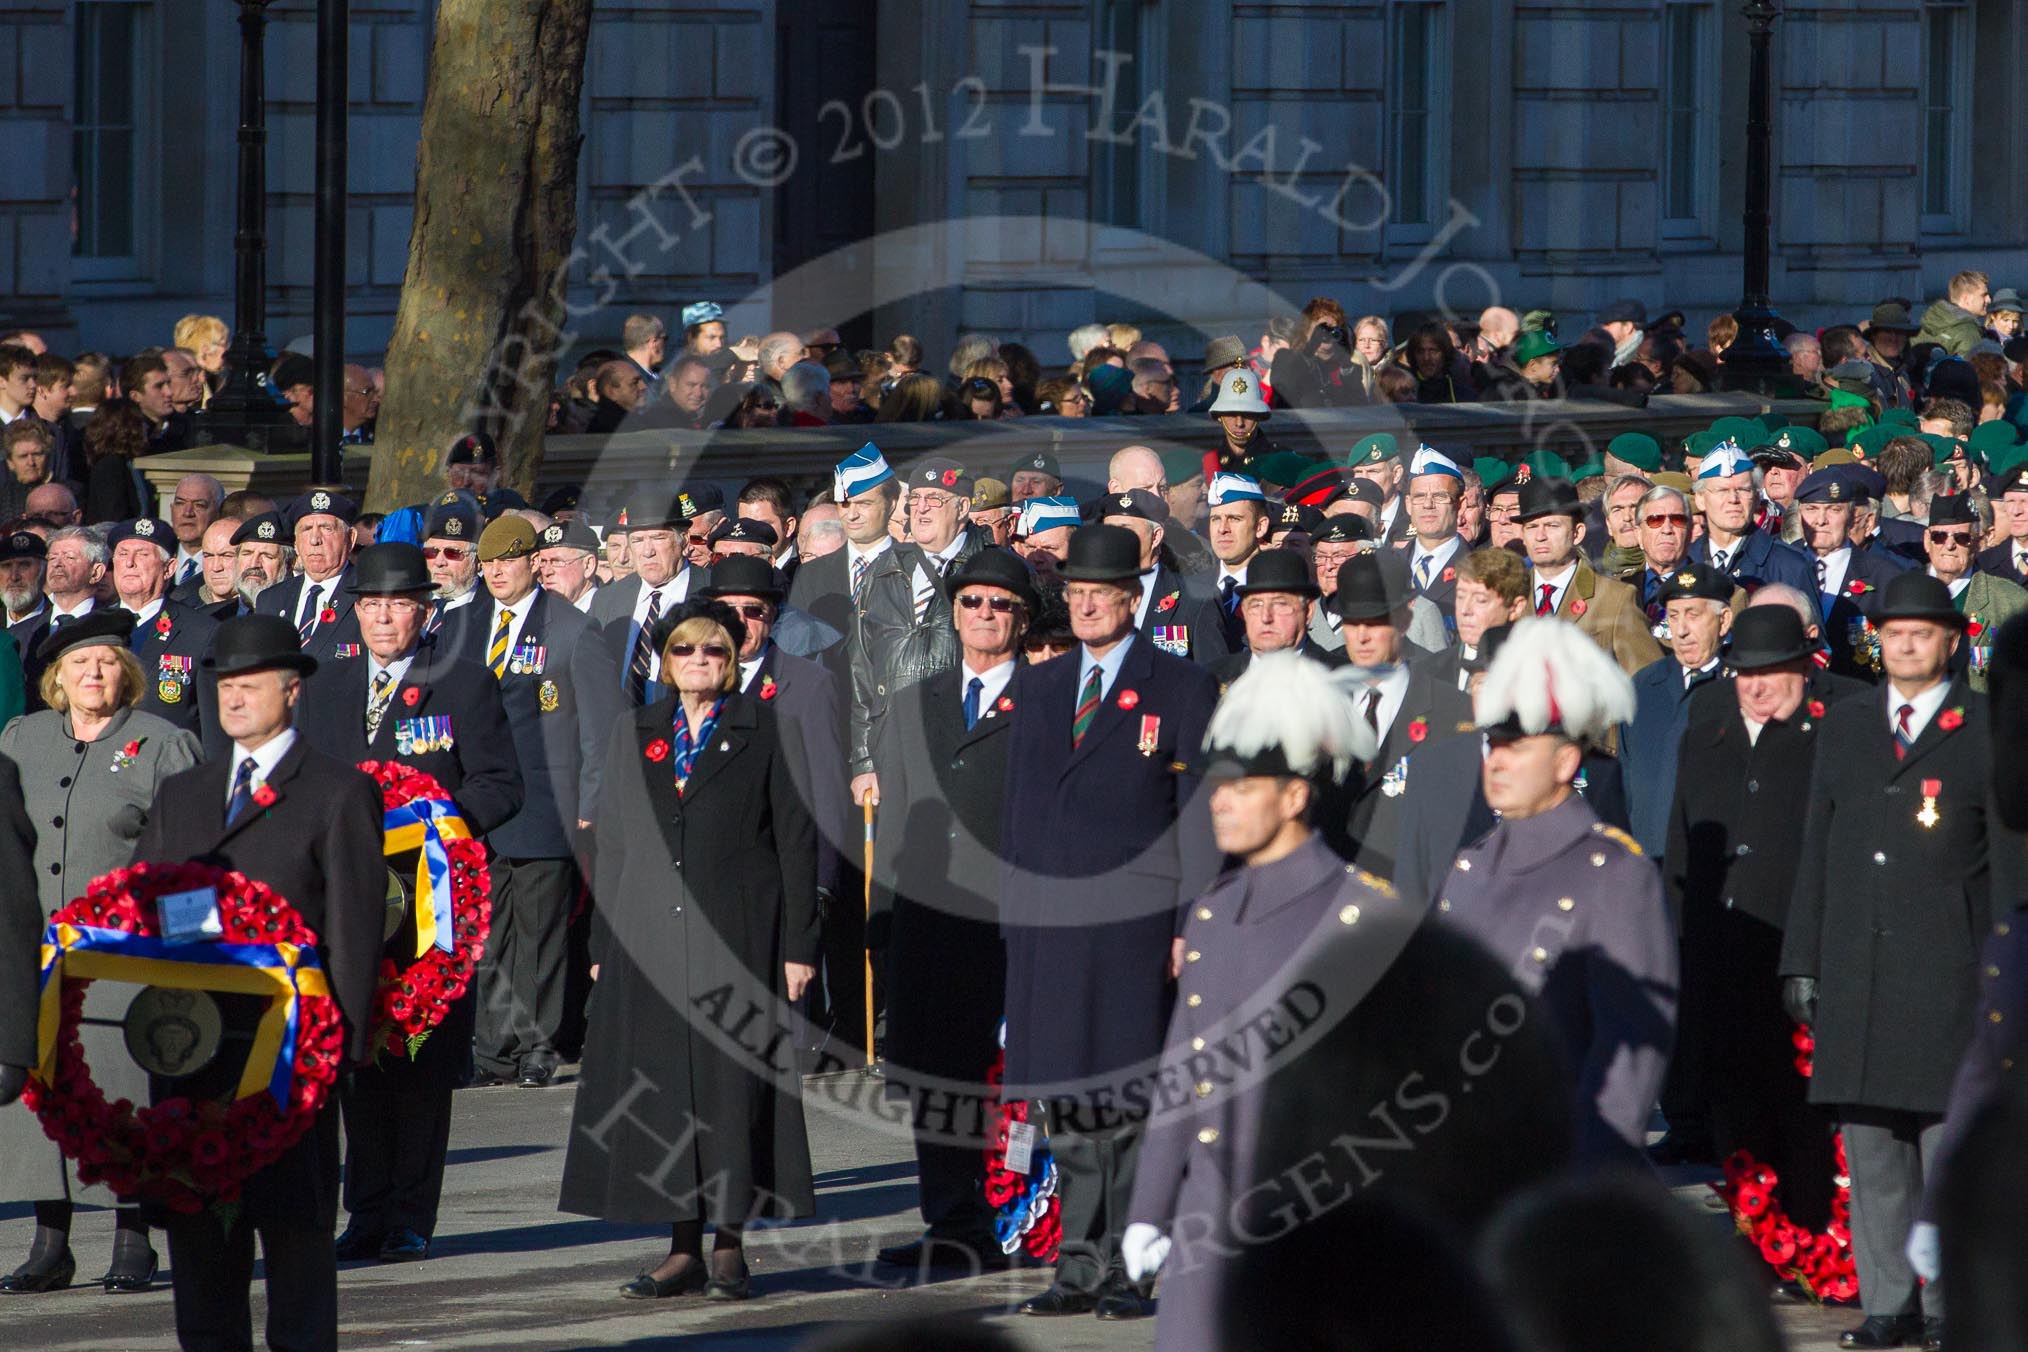 Remembrance Sunday 2012 Cenotaph March Past: Minutes before the start of  the march-mast..
Whitehall, Cenotaph,
London SW1,

United Kingdom,
on 11 November 2012 at 11:25, image #1